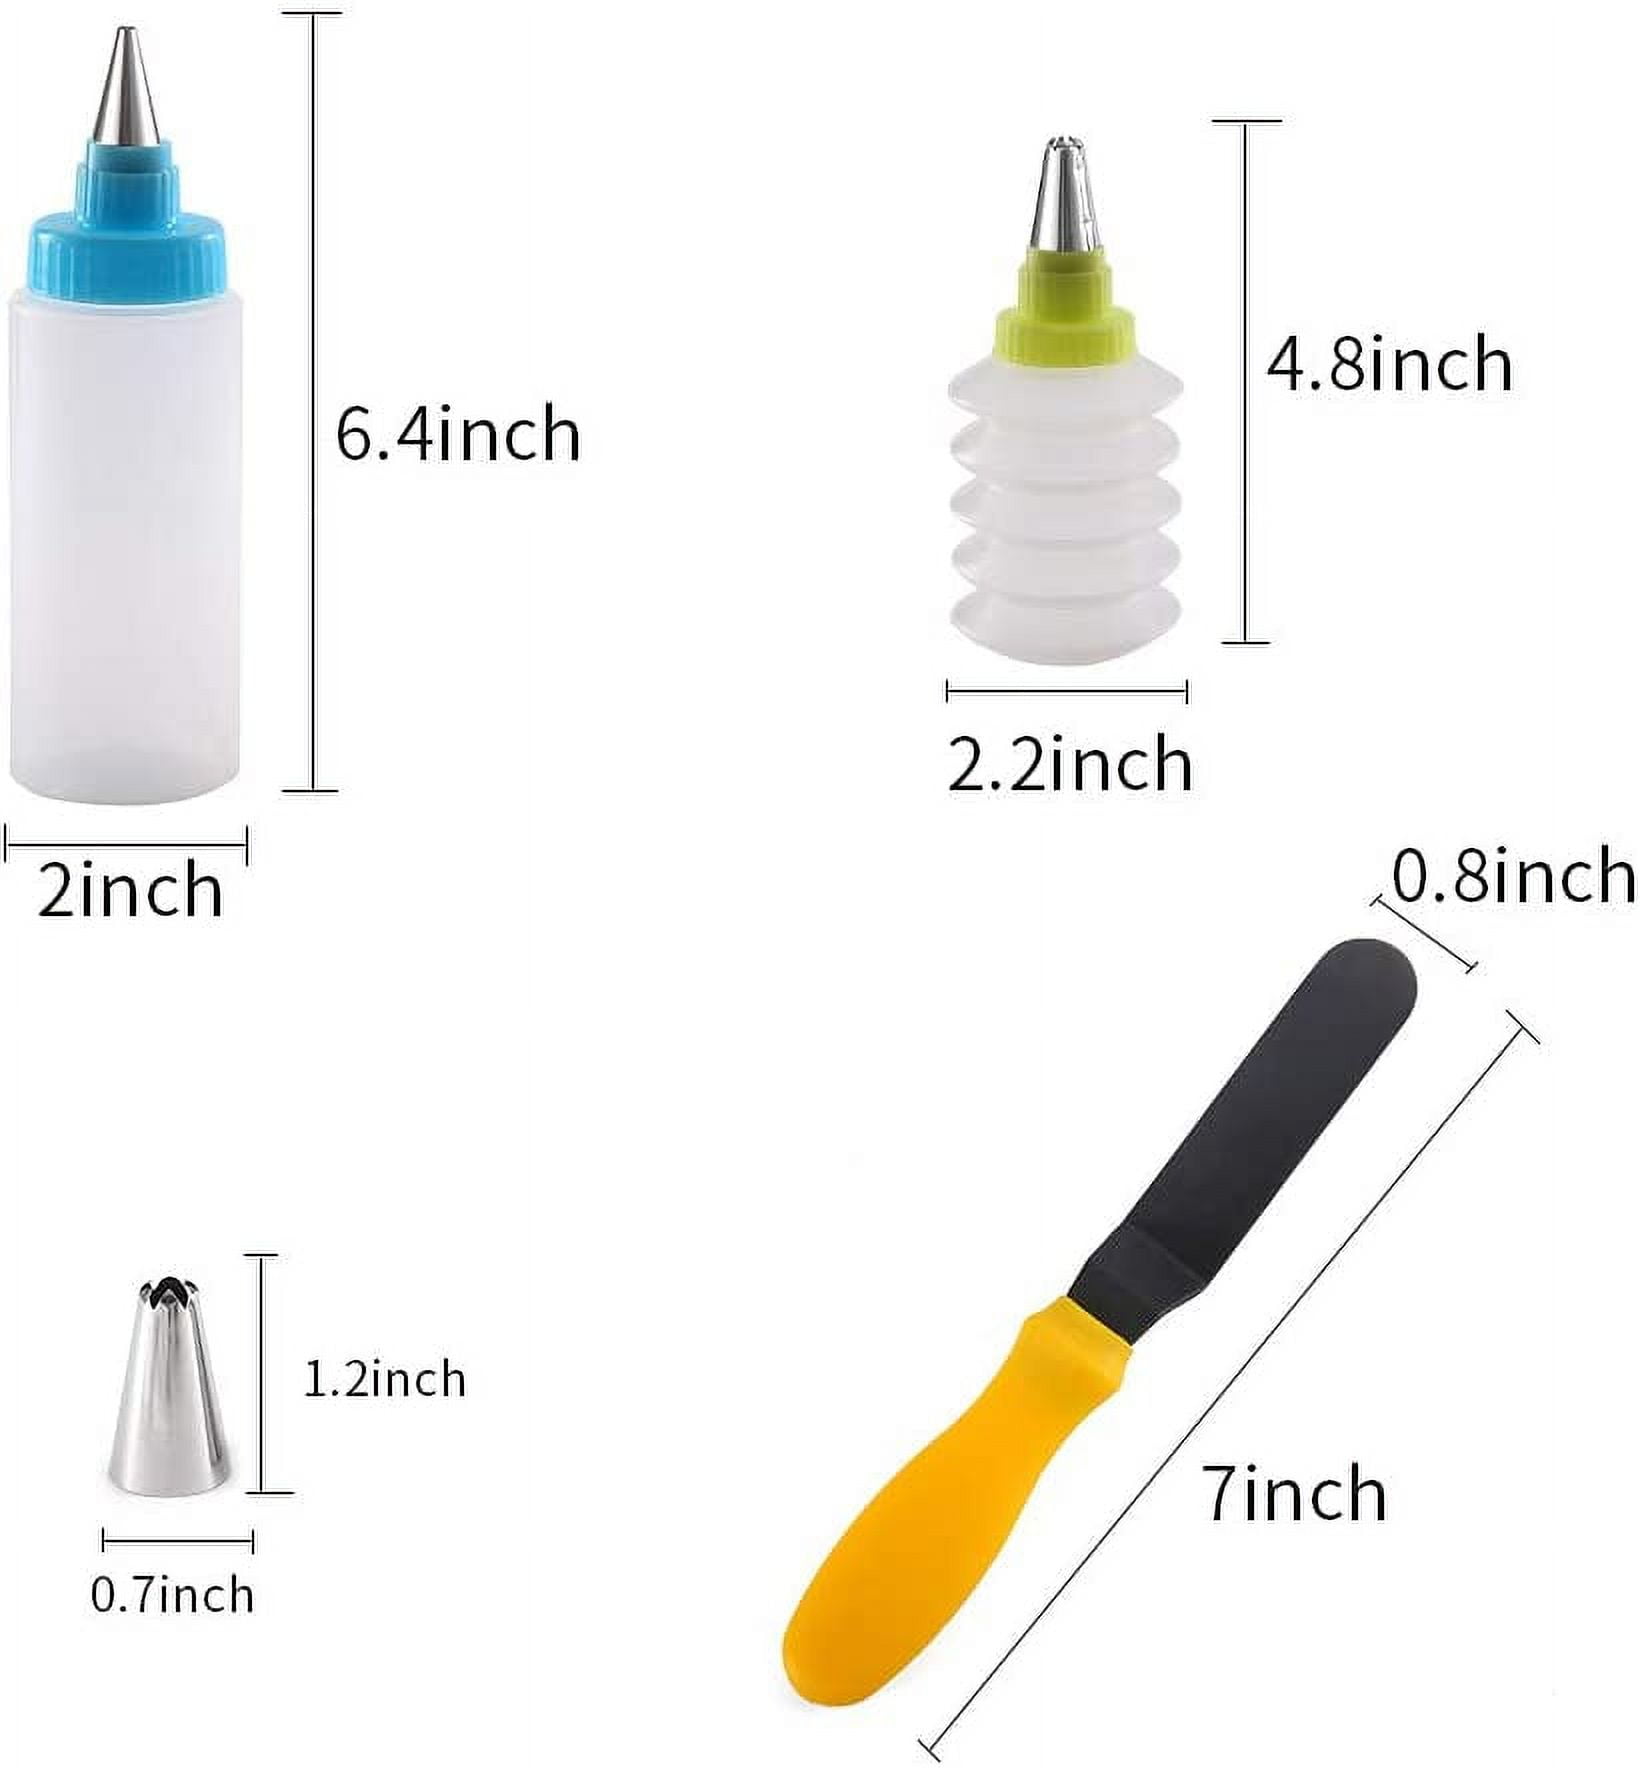 Wisehold Icing Bottles with Stainless Steel Piping Tips (8 pcs) - 2  Foldable Bottle, 4 Beak Bottle and 2 Bicolor Bottle, Plastic Squeeze  Bottles Easy